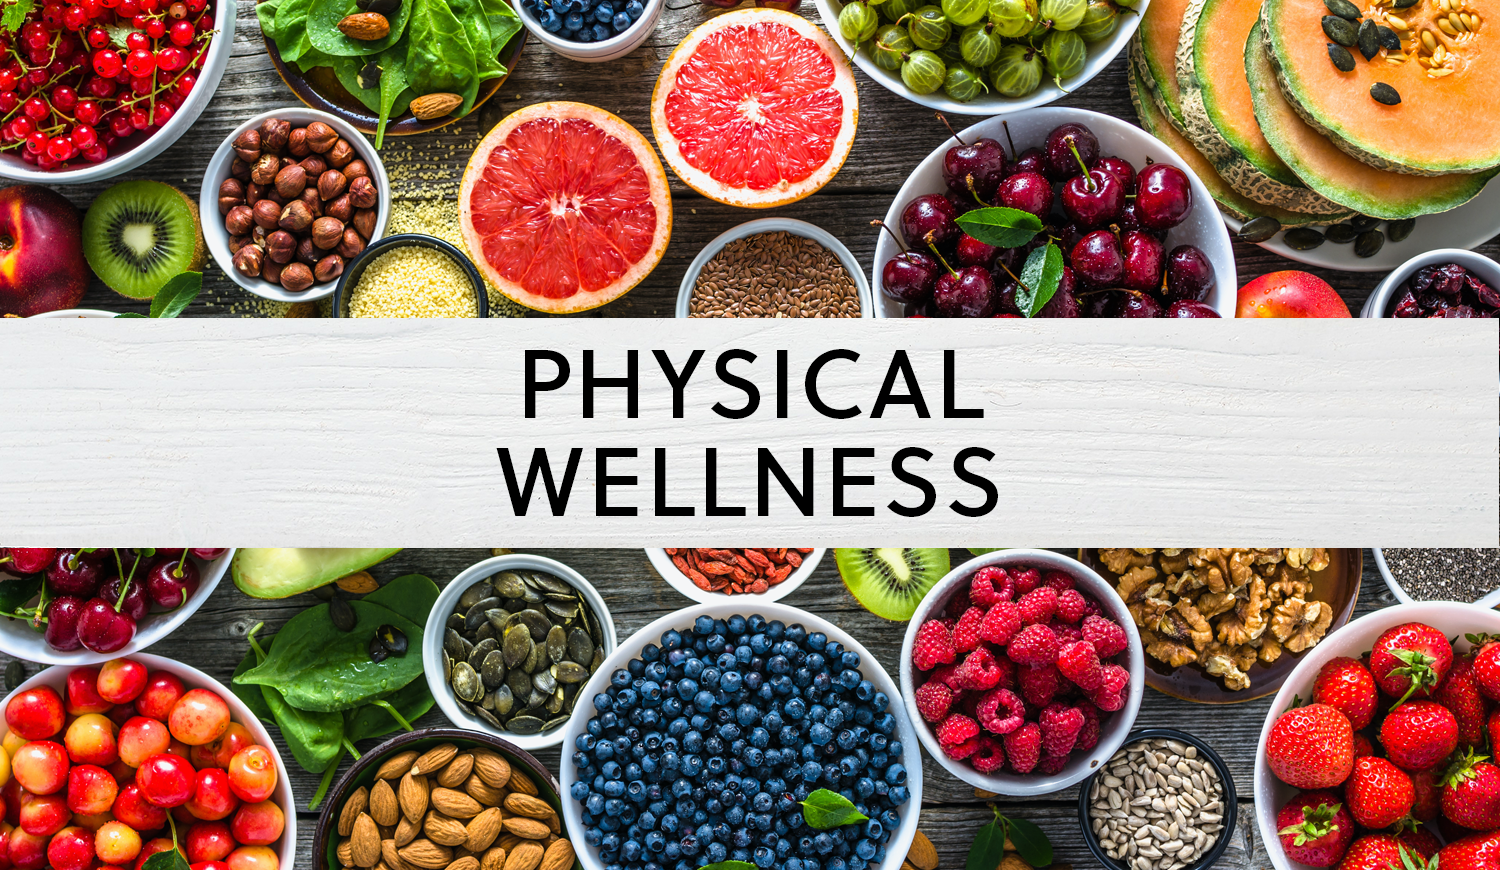 9 Tips for Physical Wellness during our New Normal